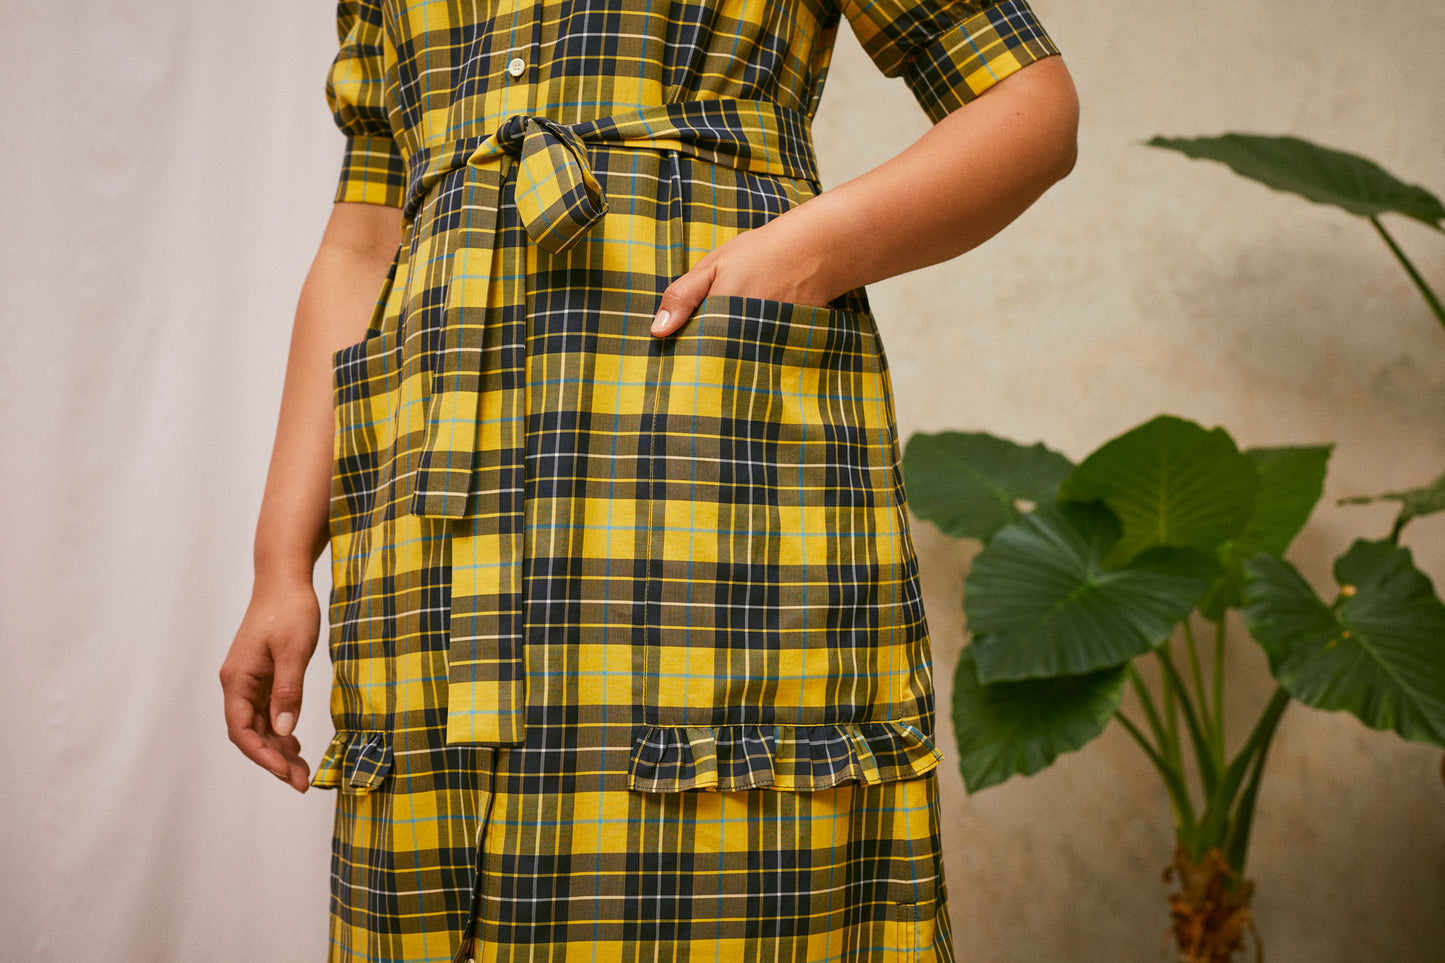 Close up of Saywood's Rosa yellow check shirtdress, with the belt tied at the waist. Model has one hand in the patch pocket, wthe other hangs to her side. Ruffles at the base of the pockets can be seen. A plant and drop of pink fabric can be seen in the background.